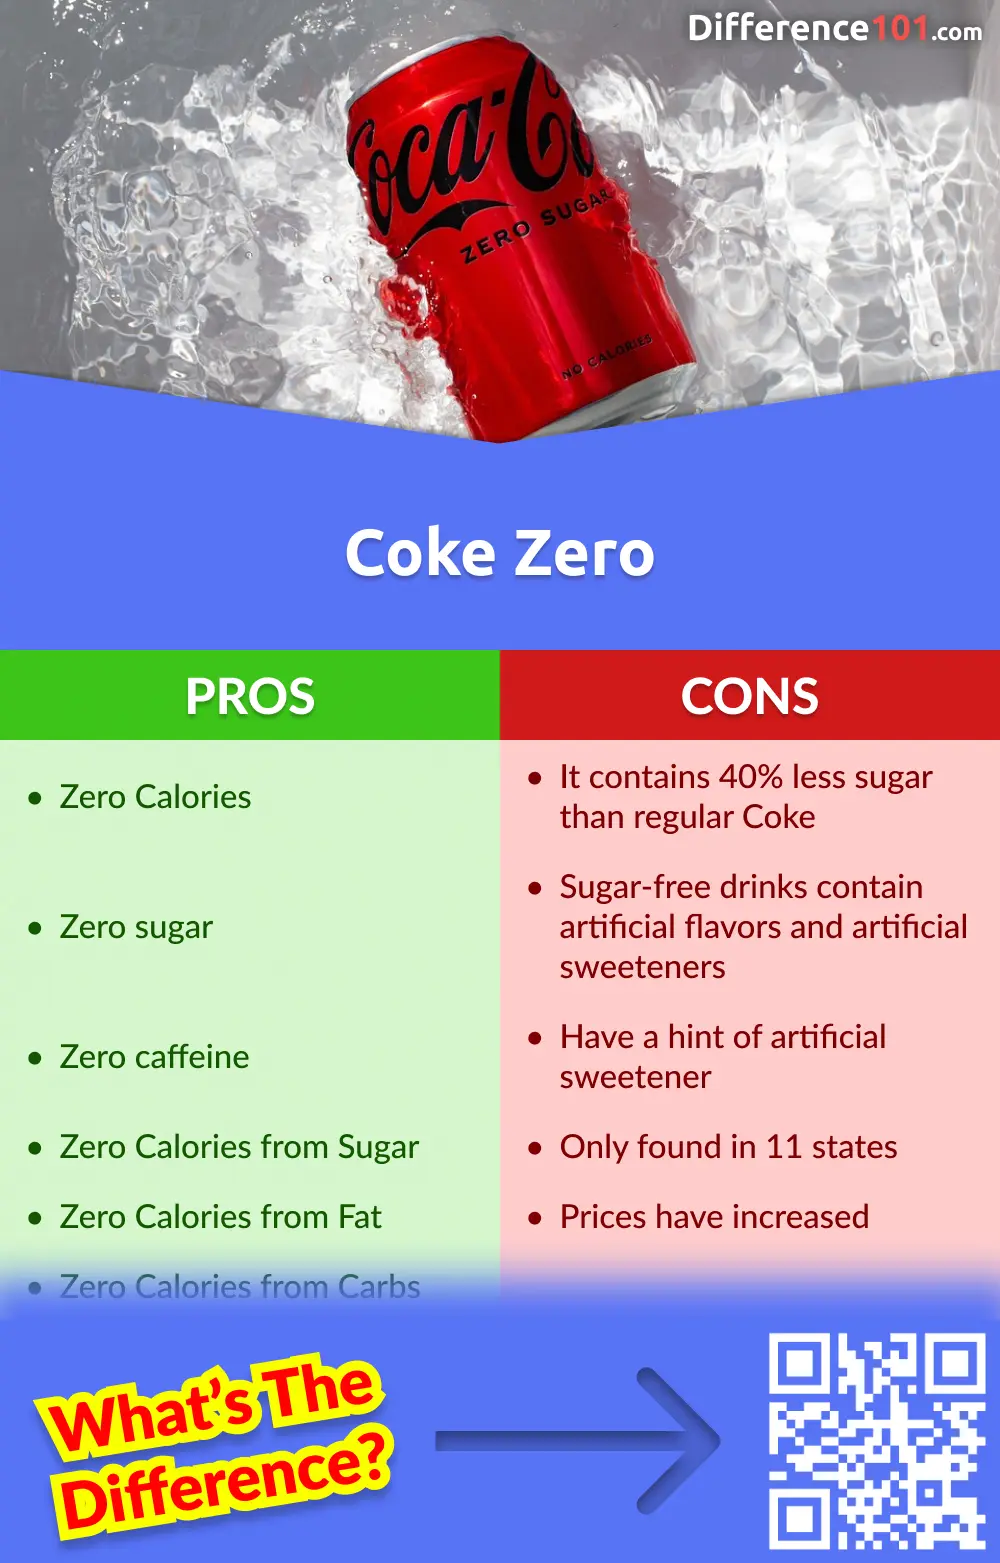 Diet Coke vs. Coke Zero: Differences, Pros & Cons, Similarities | Difference 101